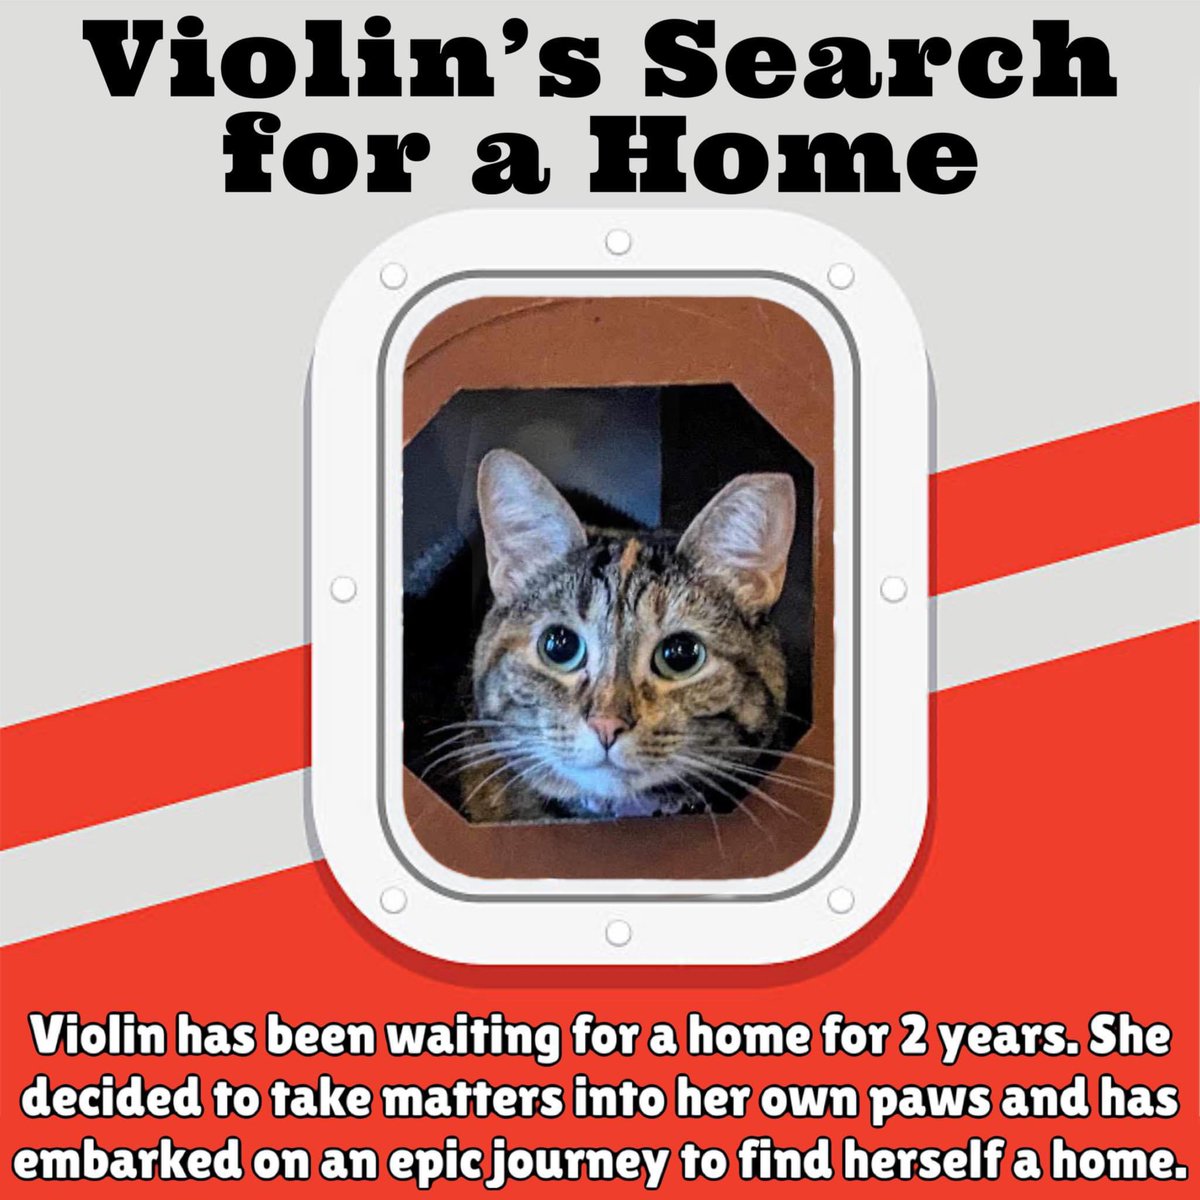 Take two! ❤️❤️Loudoun County, VA. 2 years!!! 😿😿 VIOLIN 🎻 has just embarked on a worldwide quest to find a purr-manent home! Learn more about this beautiful kitty on their website and apply to adopt her today! #WhereisViolin #FeeWaived #adoptdontshop…